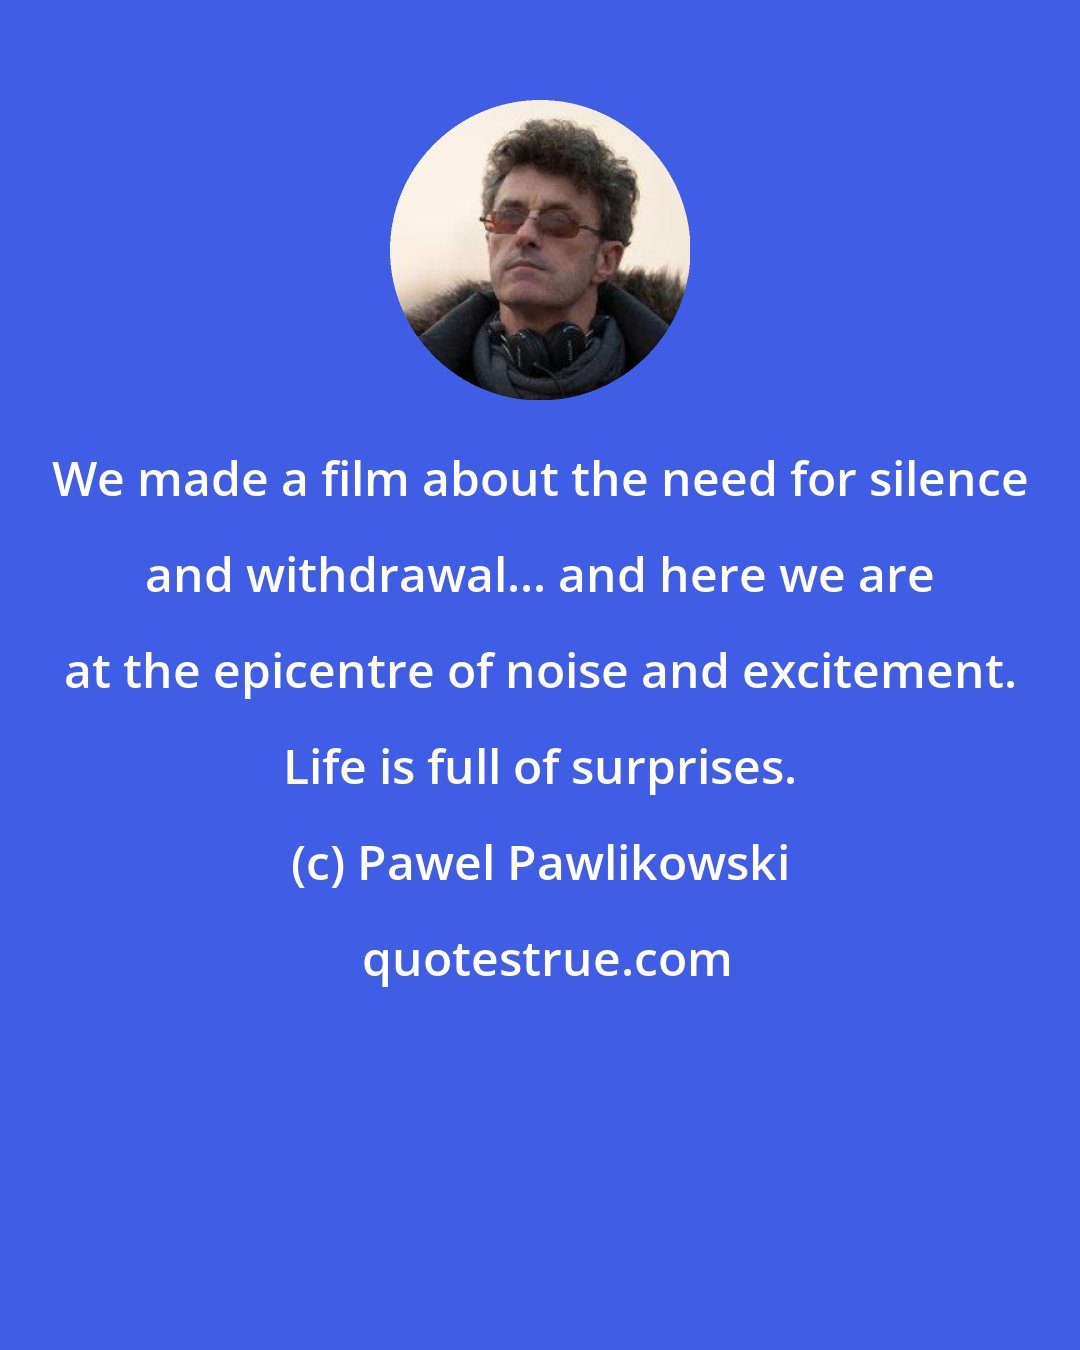 Pawel Pawlikowski: We made a film about the need for silence and withdrawal... and here we are at the epicentre of noise and excitement. Life is full of surprises.